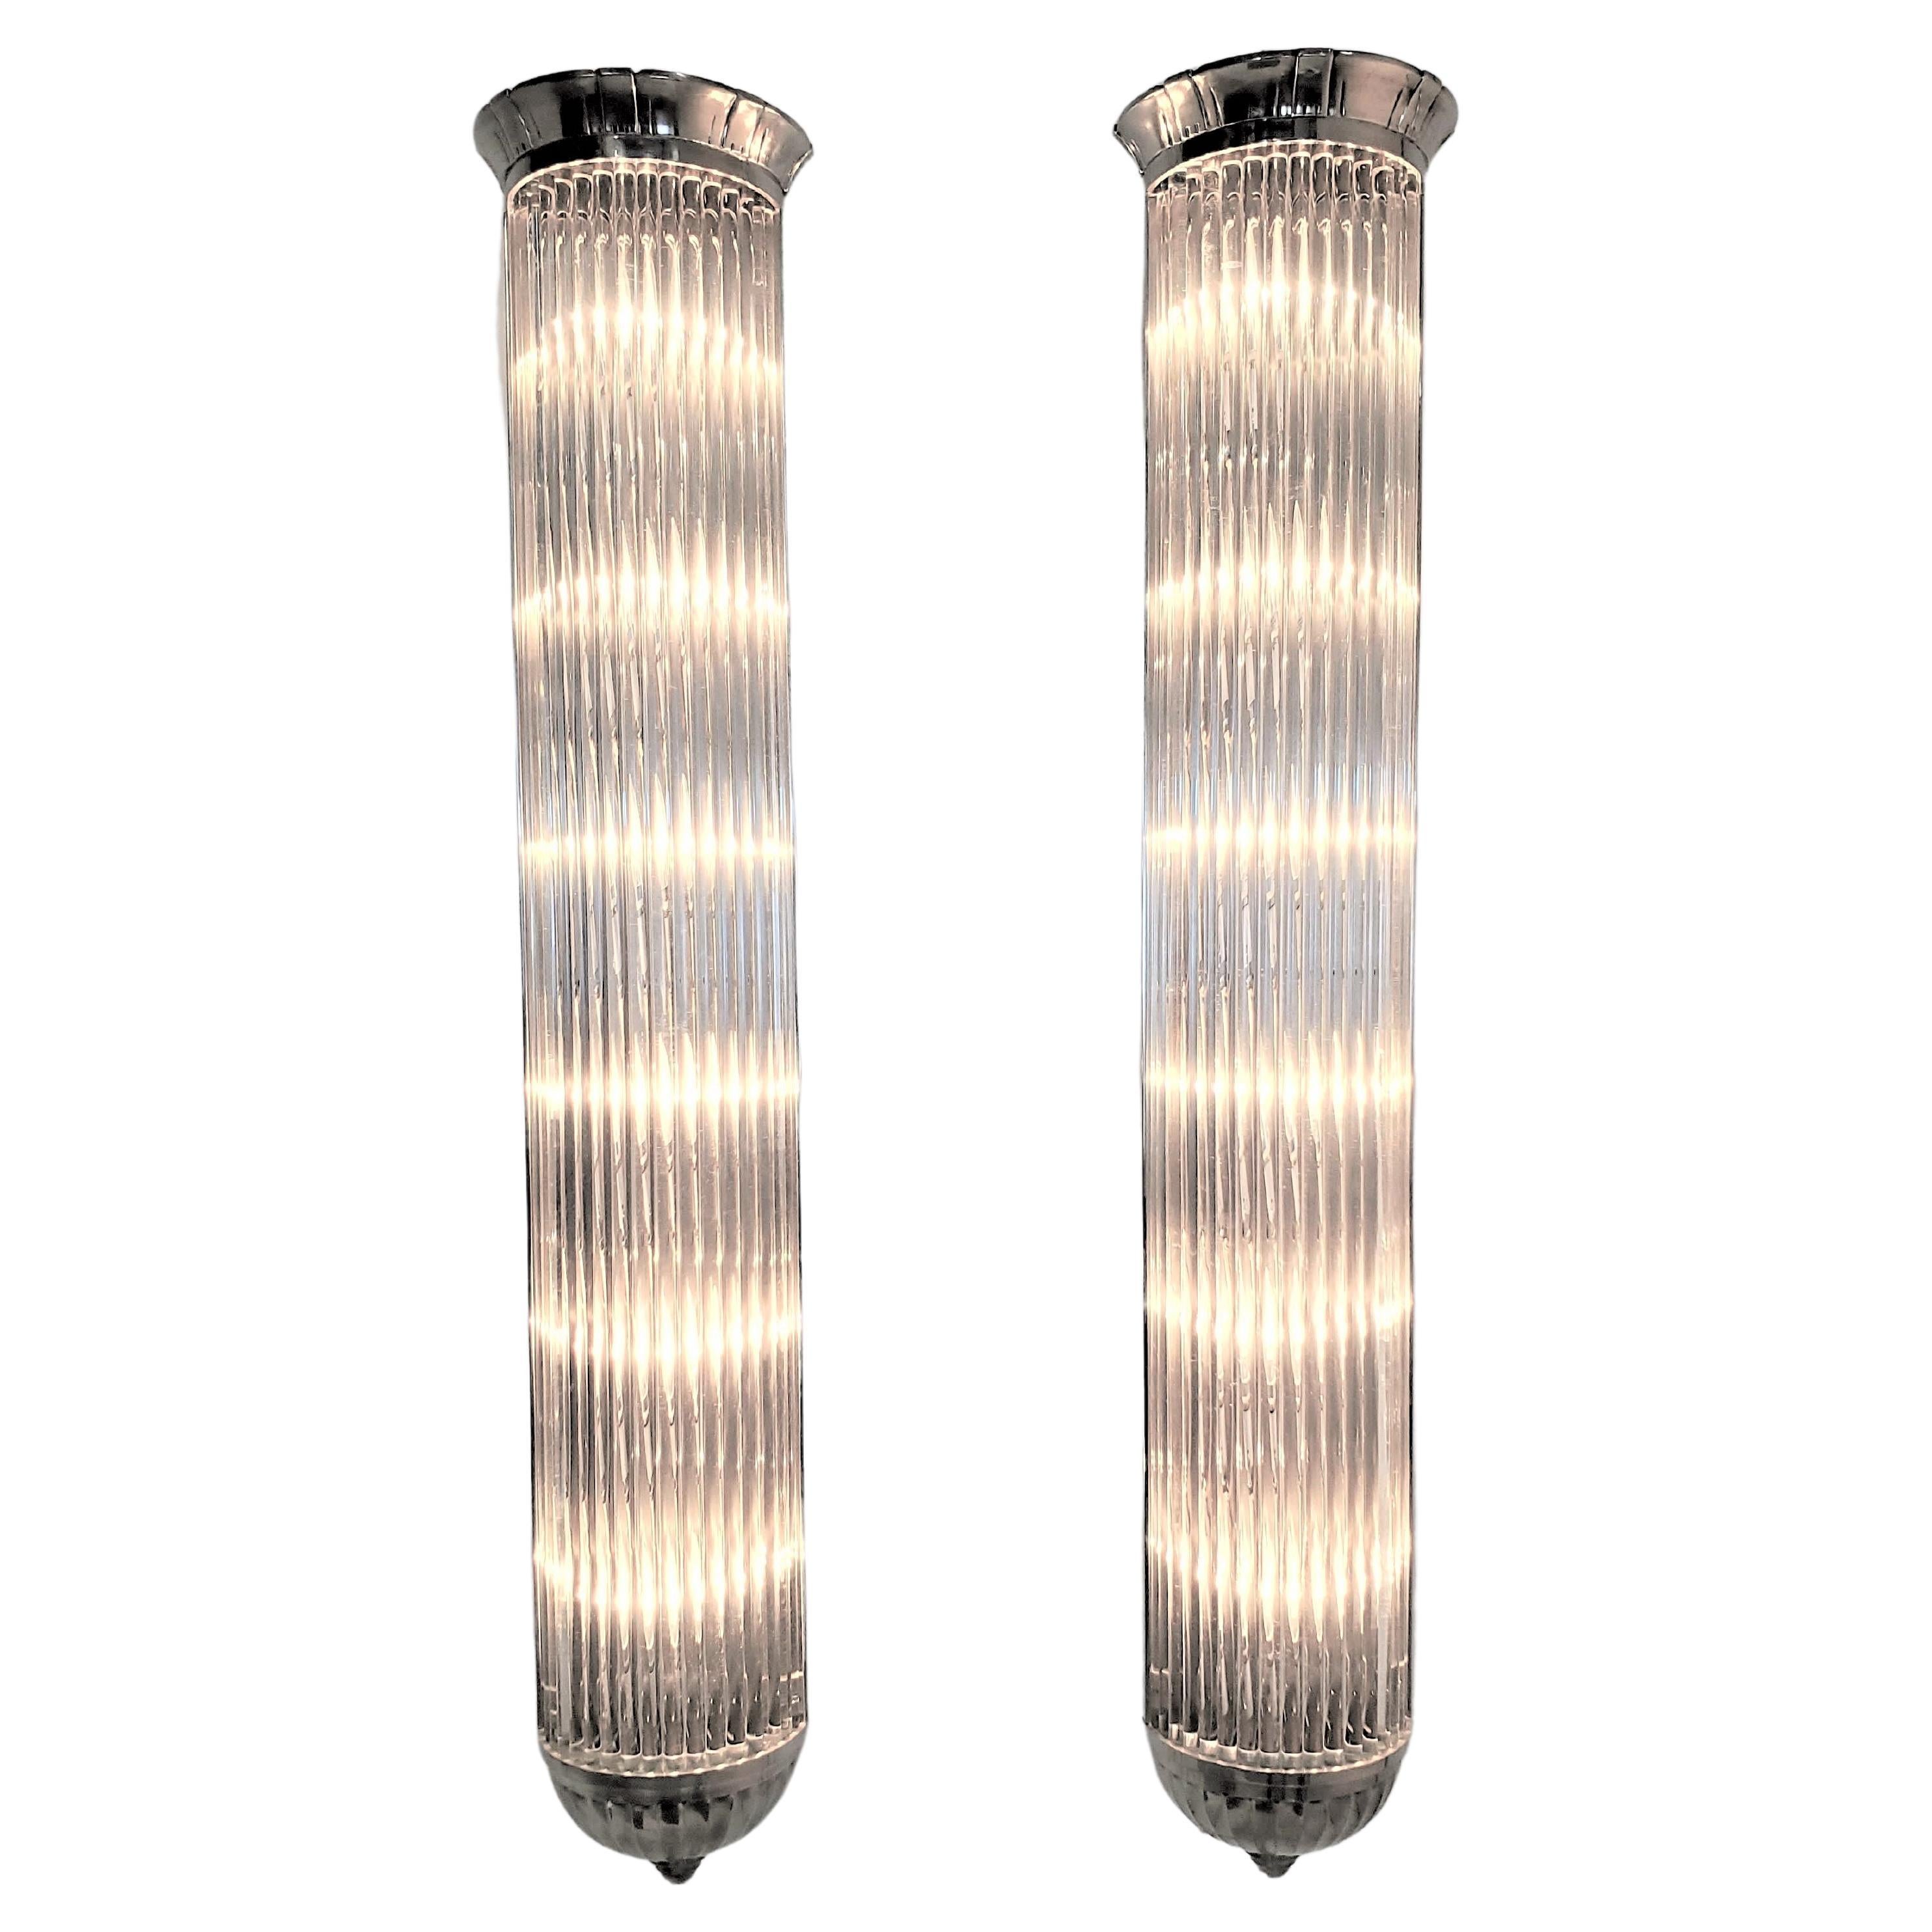 Monumental Pair of French Modernist Long Tubular Sconces by Petitot For Sale